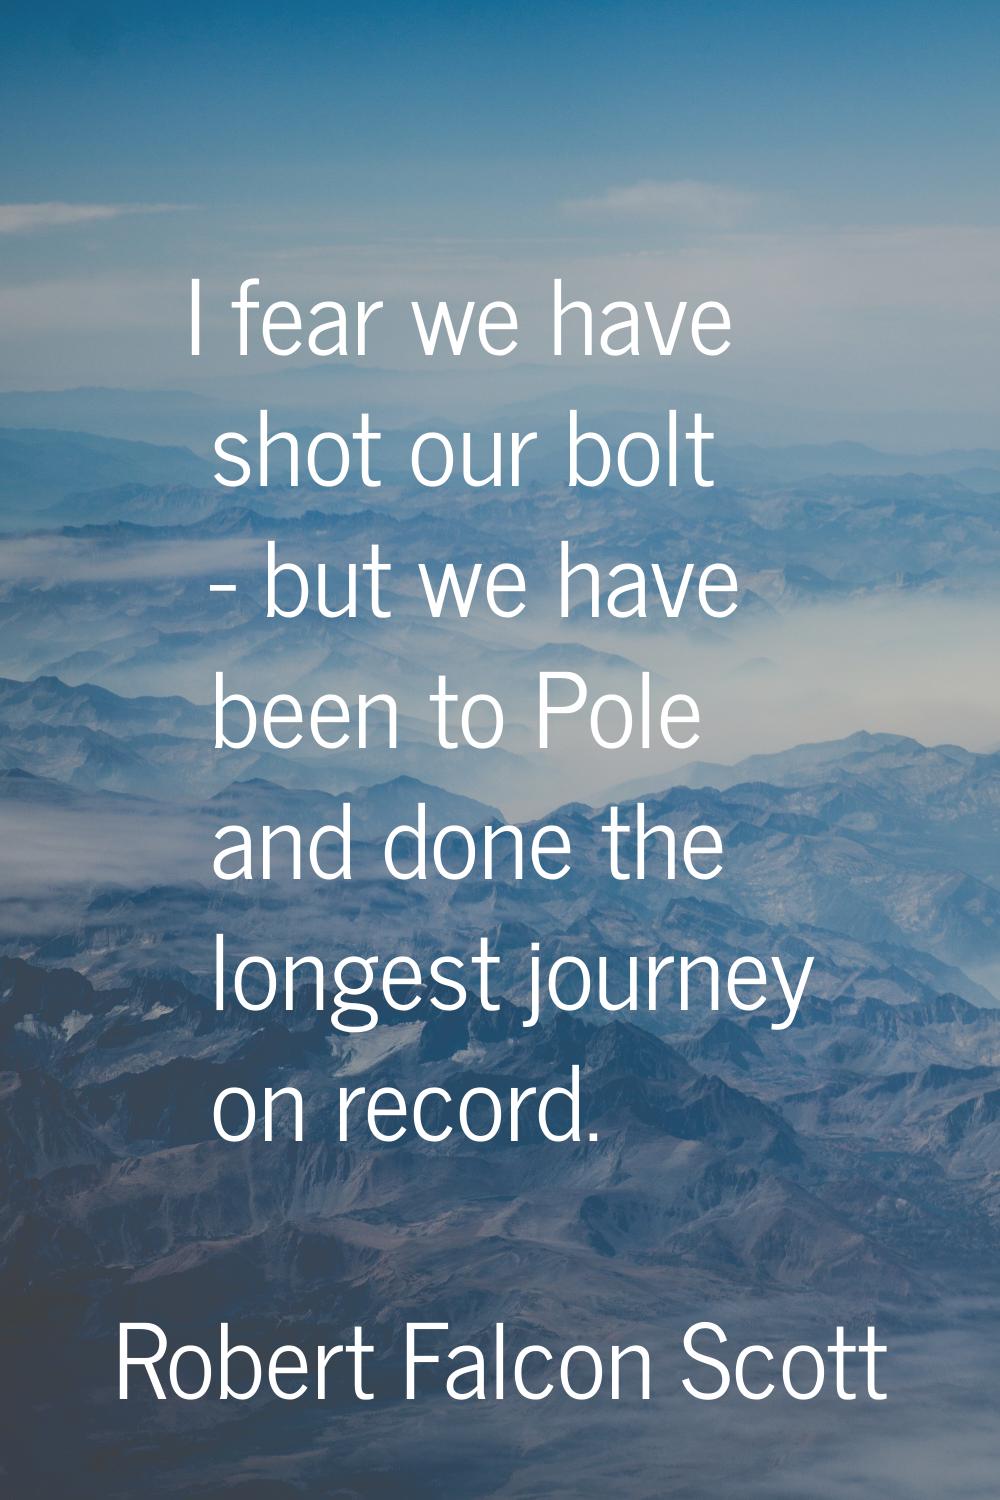 I fear we have shot our bolt - but we have been to Pole and done the longest journey on record.